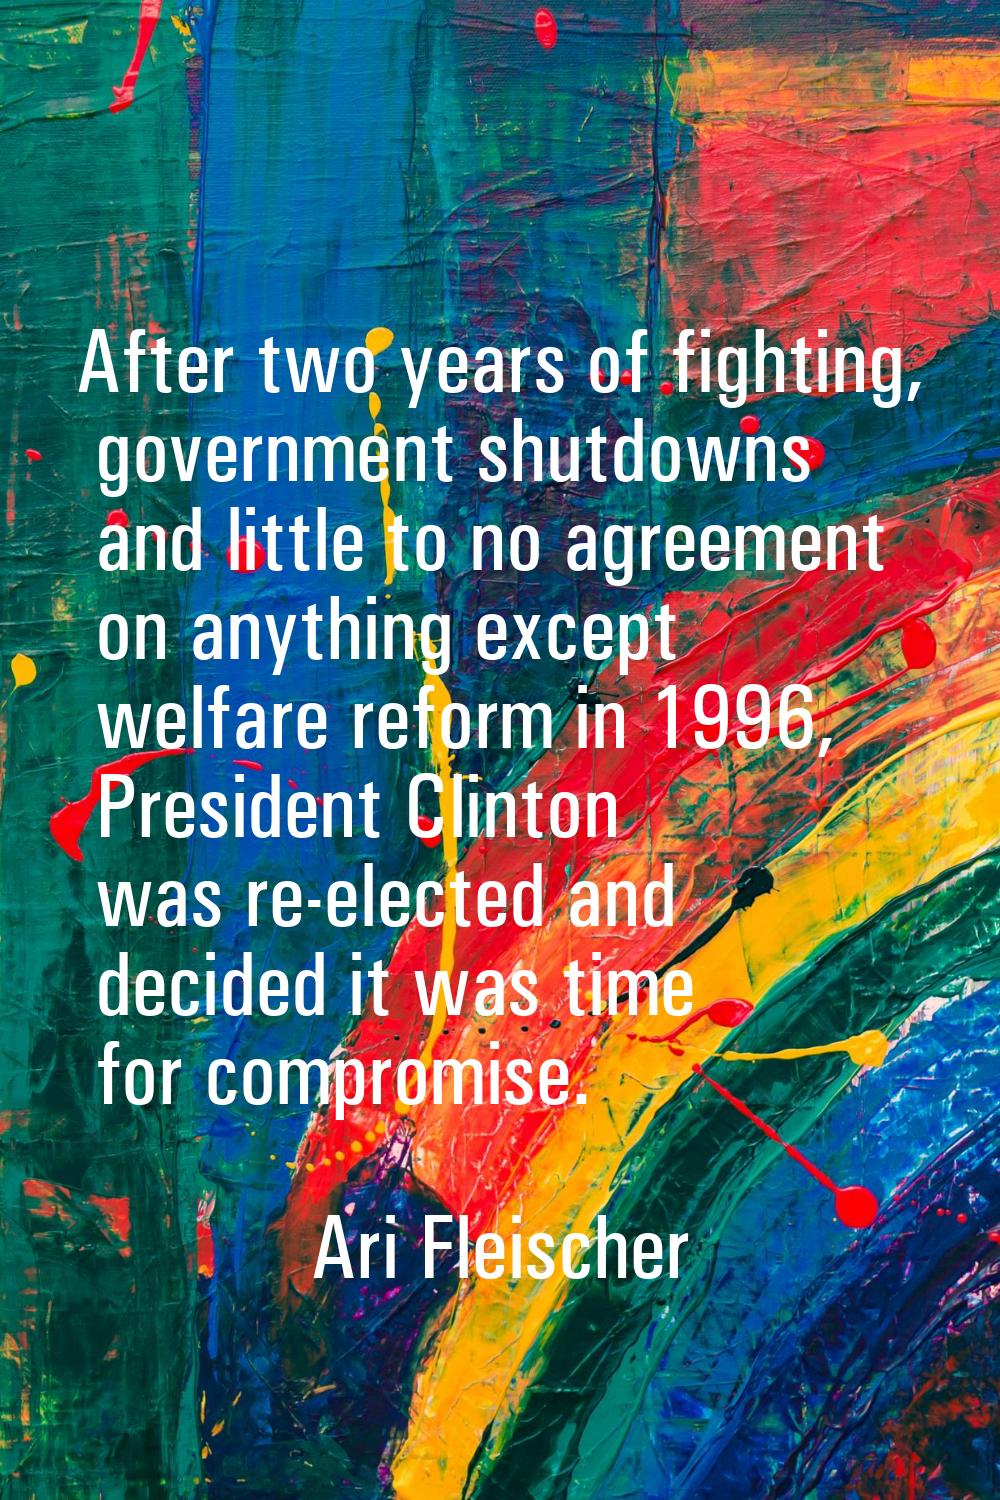 After two years of fighting, government shutdowns and little to no agreement on anything except wel